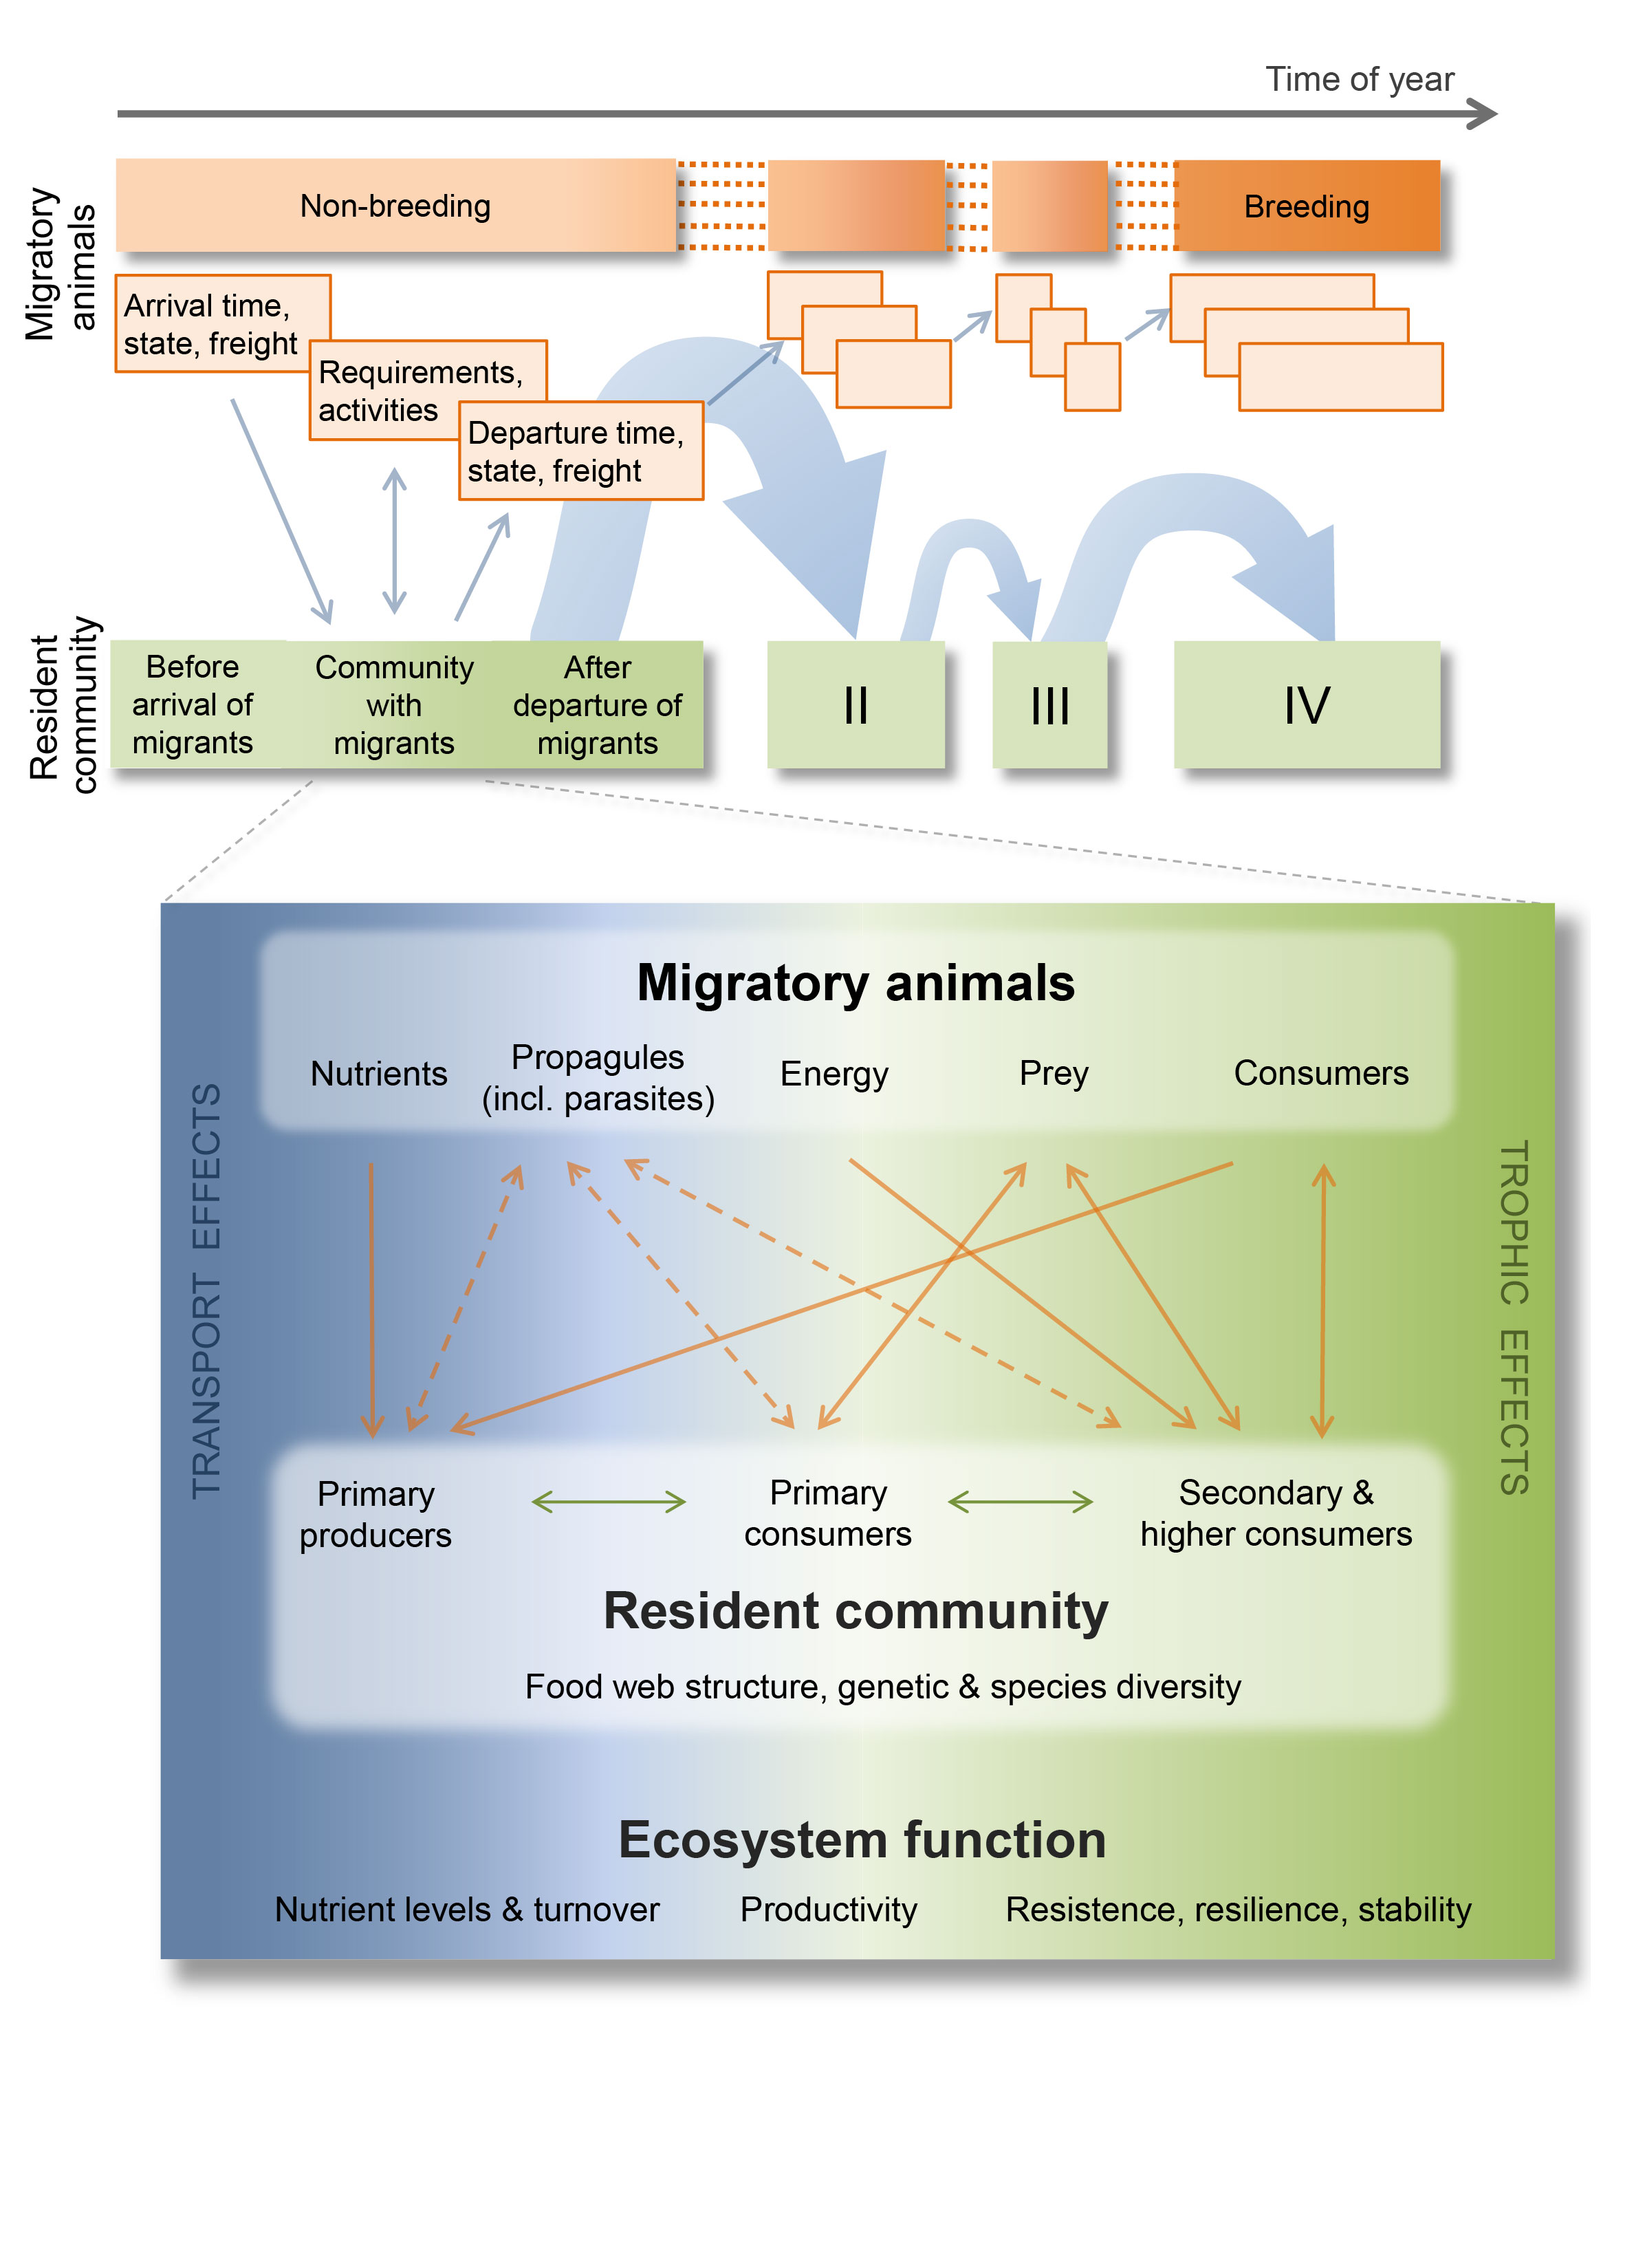 \label{fig:MigLinkCommunities} Schematic overview of the interactions between migrants and the multiple resident communities they visit during their annual or life-cycles. At one specific site, migrants bring with them nutrients and energy but also (propagules of) other organisms including parasites accumulated on earlier sites. The migrants’ input and state embodies carry-over effects of conditions on earlier sites which importantly determine their interactions with a resident community (orange arrows): demographic rates of resident populations (species) can be directly changed (straight arrows) as, e.g., nutrients and energy are imported, but also indirectly(dashed arrows) as the transmission of parasites and any introduced species establish competitive interactions with residents. From [@Bauer.2014]